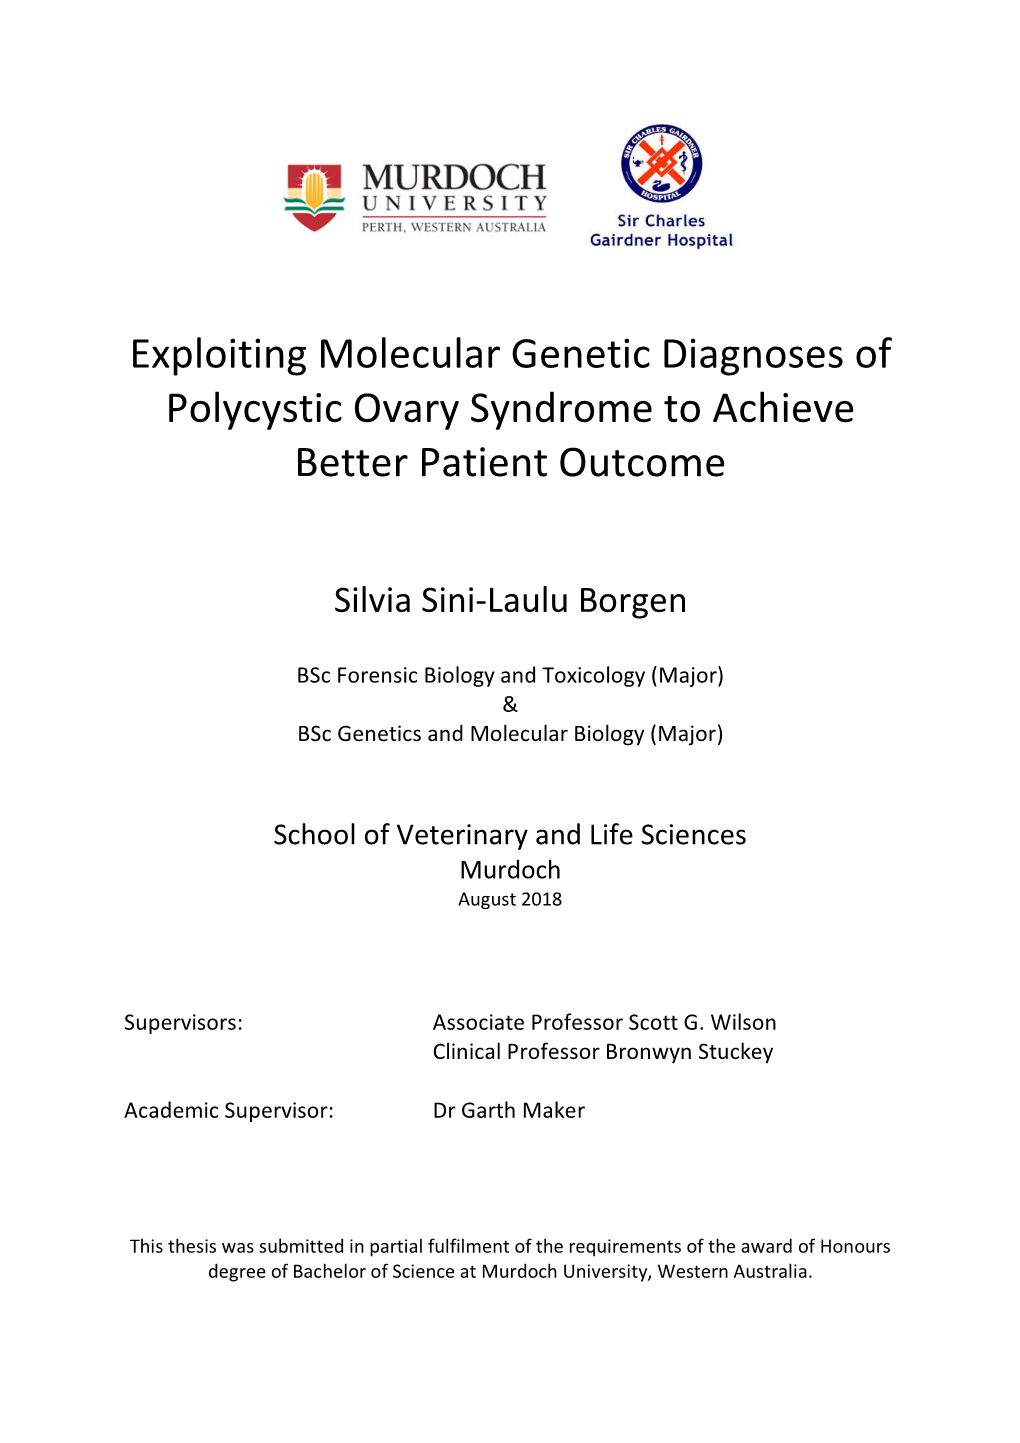 Exploiting Molecular Genetic Diagnoses of Polycystic Ovary Syndrome to Achieve Better Patient Outcome